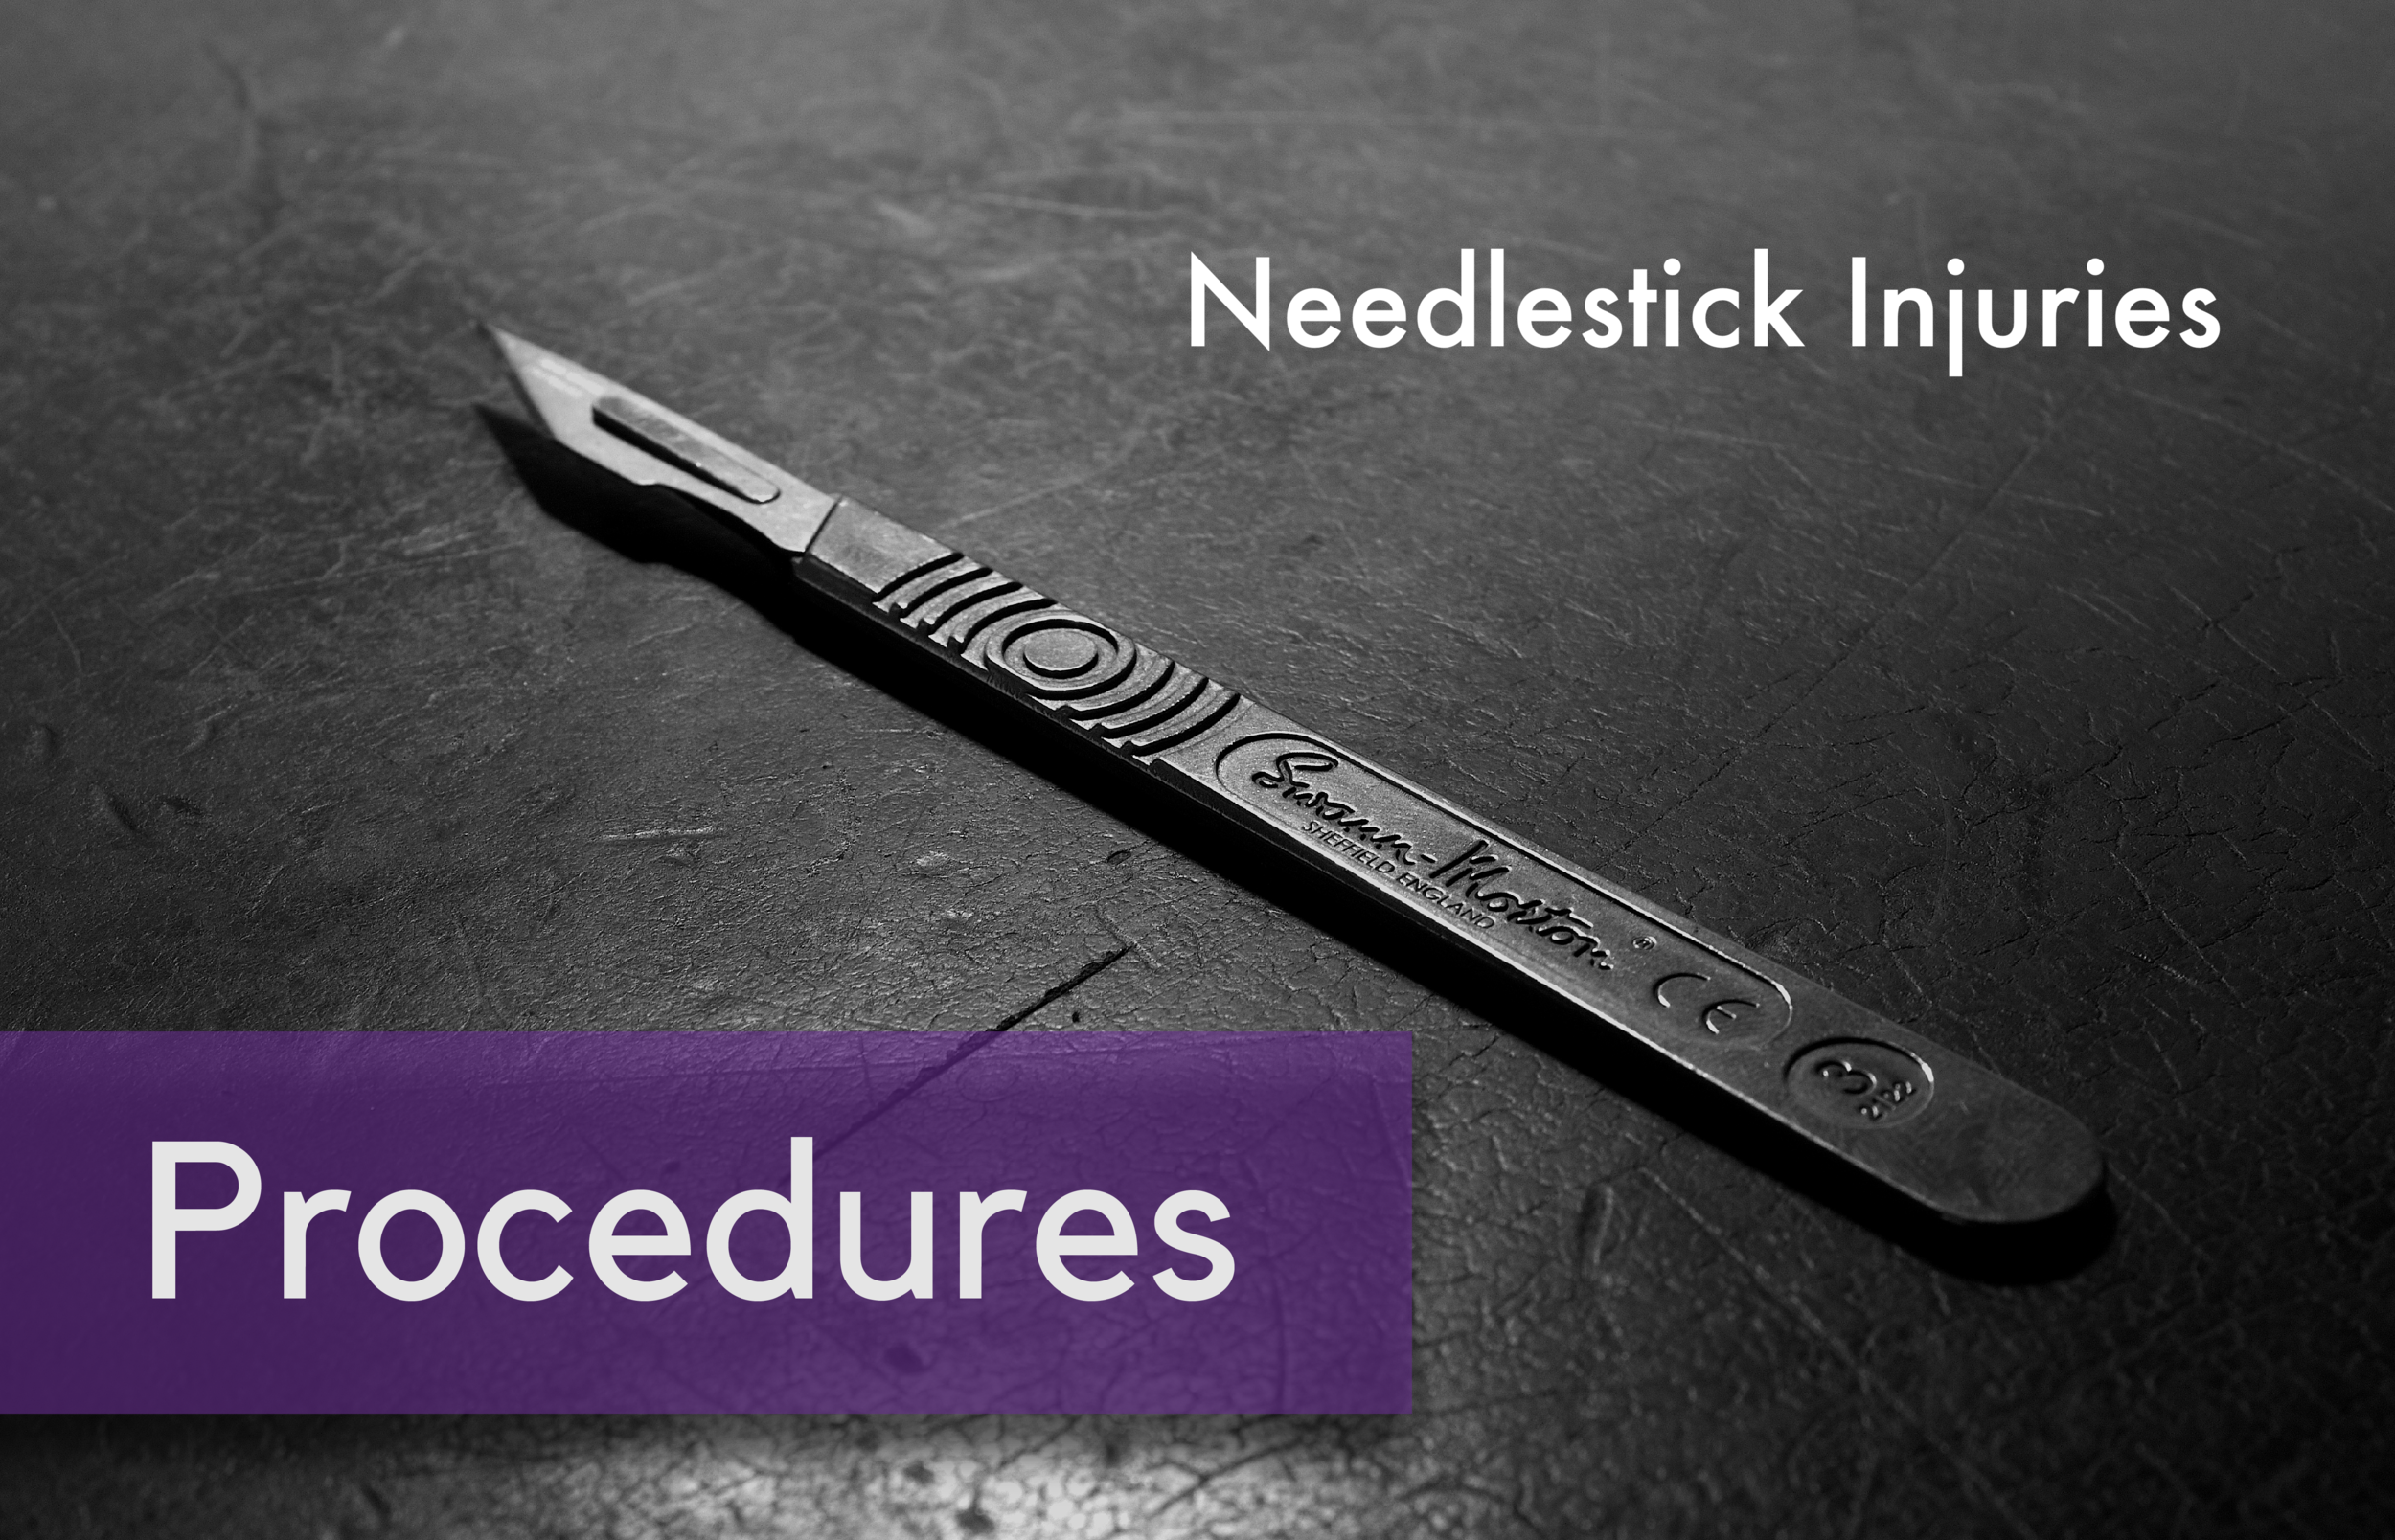 Needlestick injuries, discarded needles and the risk of HIV transmission